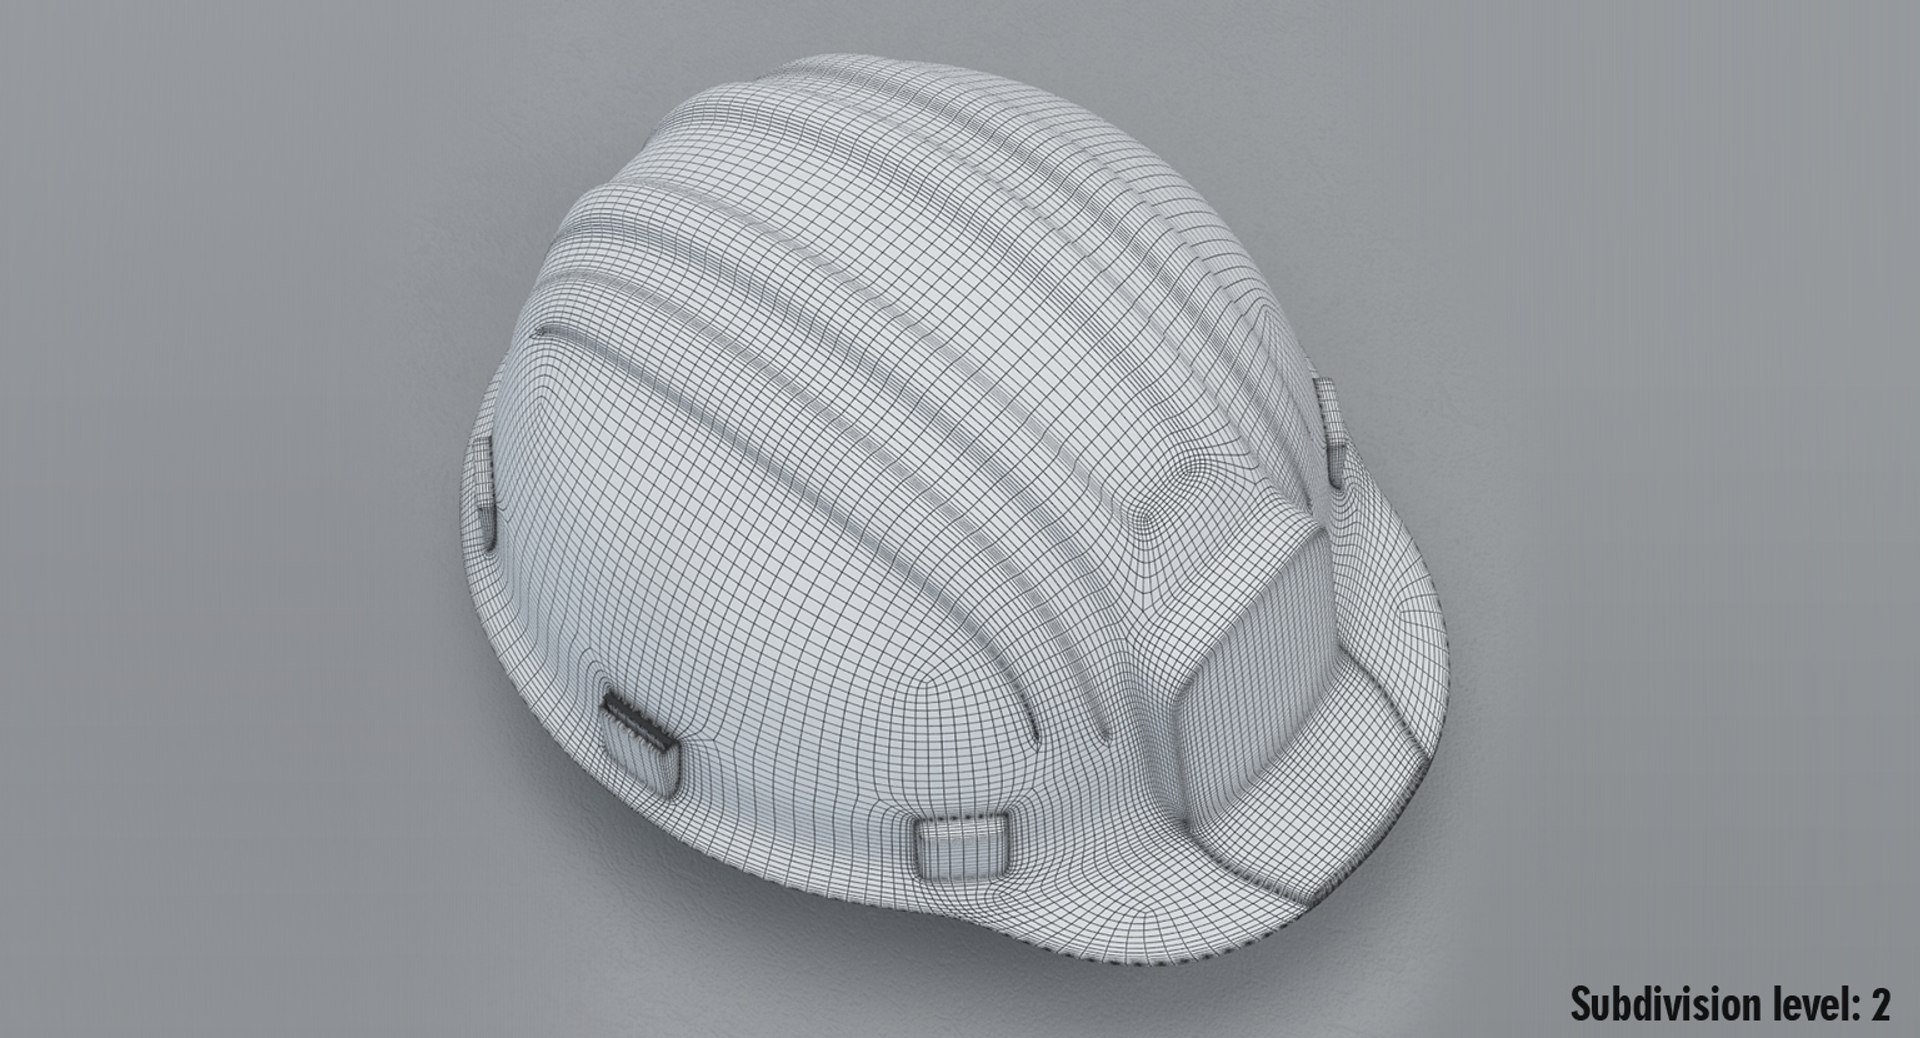 Hard Hat - Most Popular 3D Models of All Time